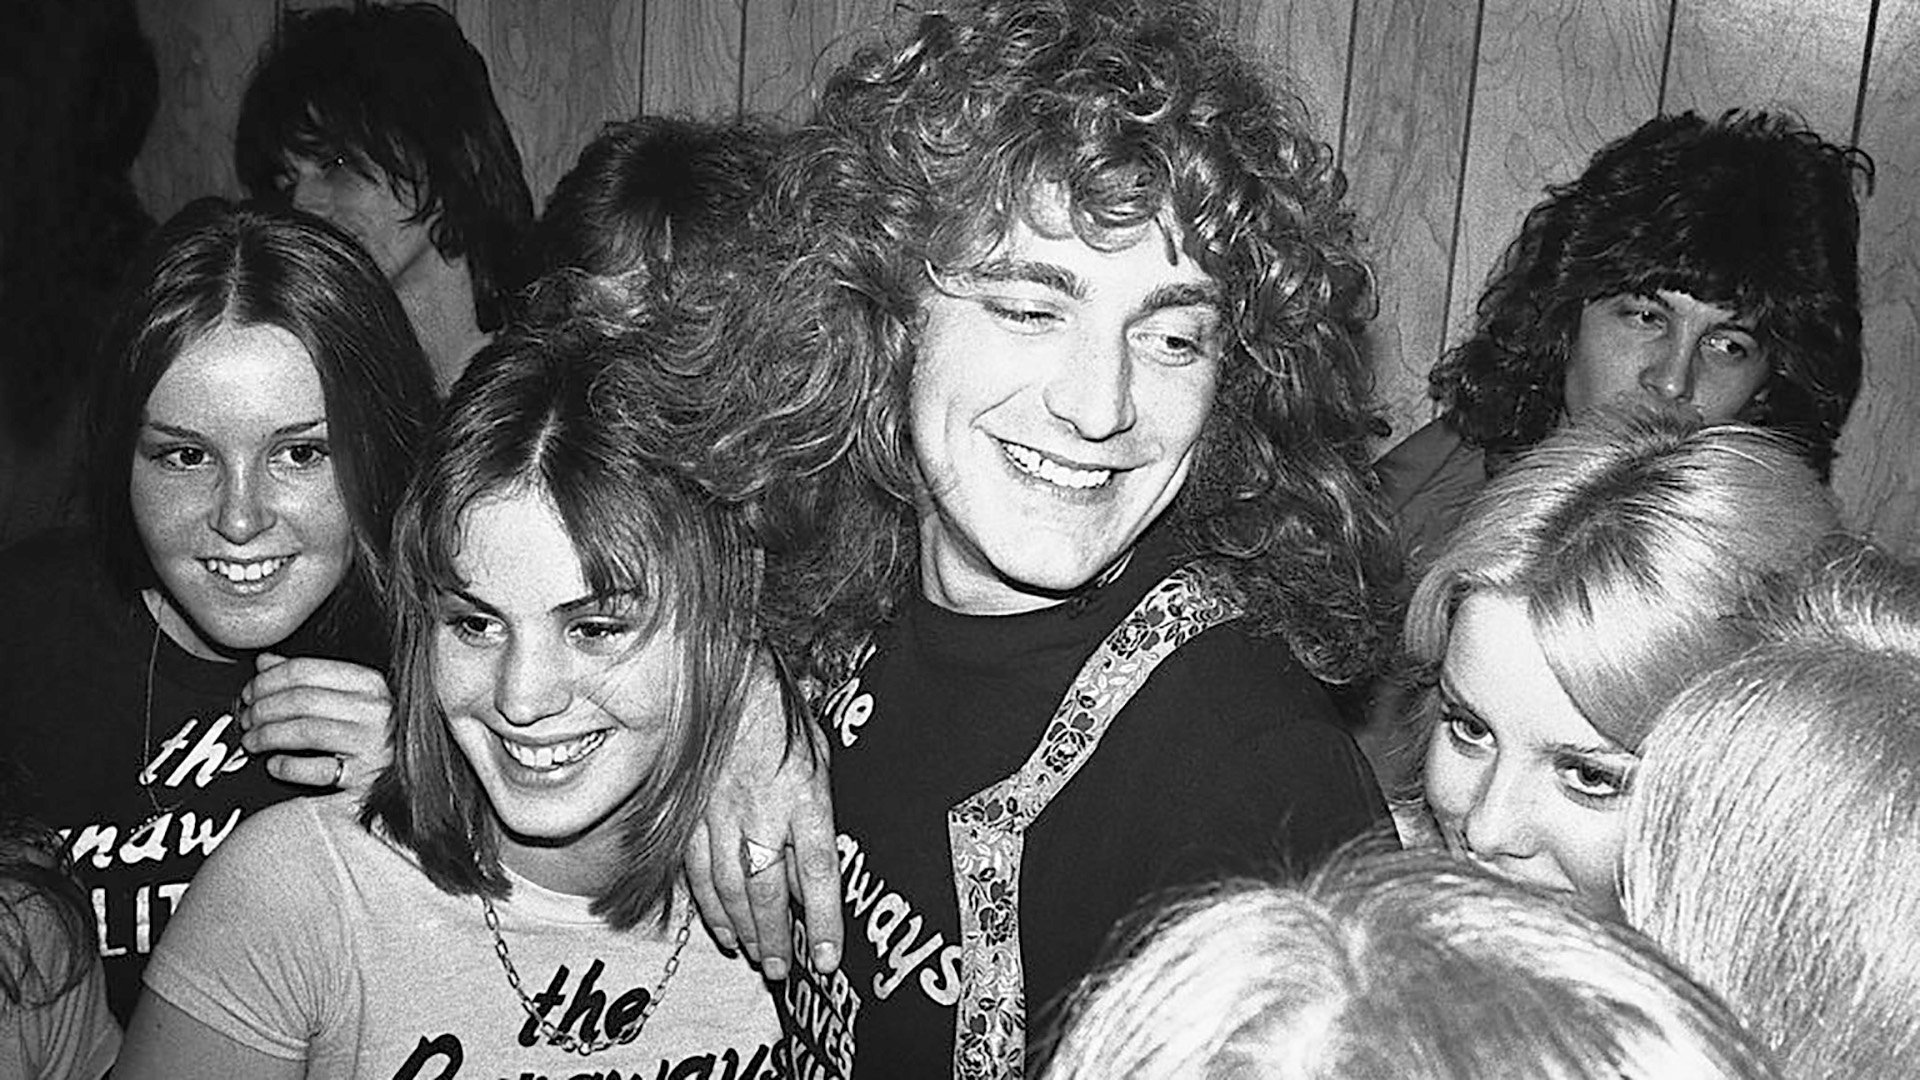 Runaways Lita Ford, Jett and Cheri Curry with Led Zeppelin singer Robert Plant in Hollywood.